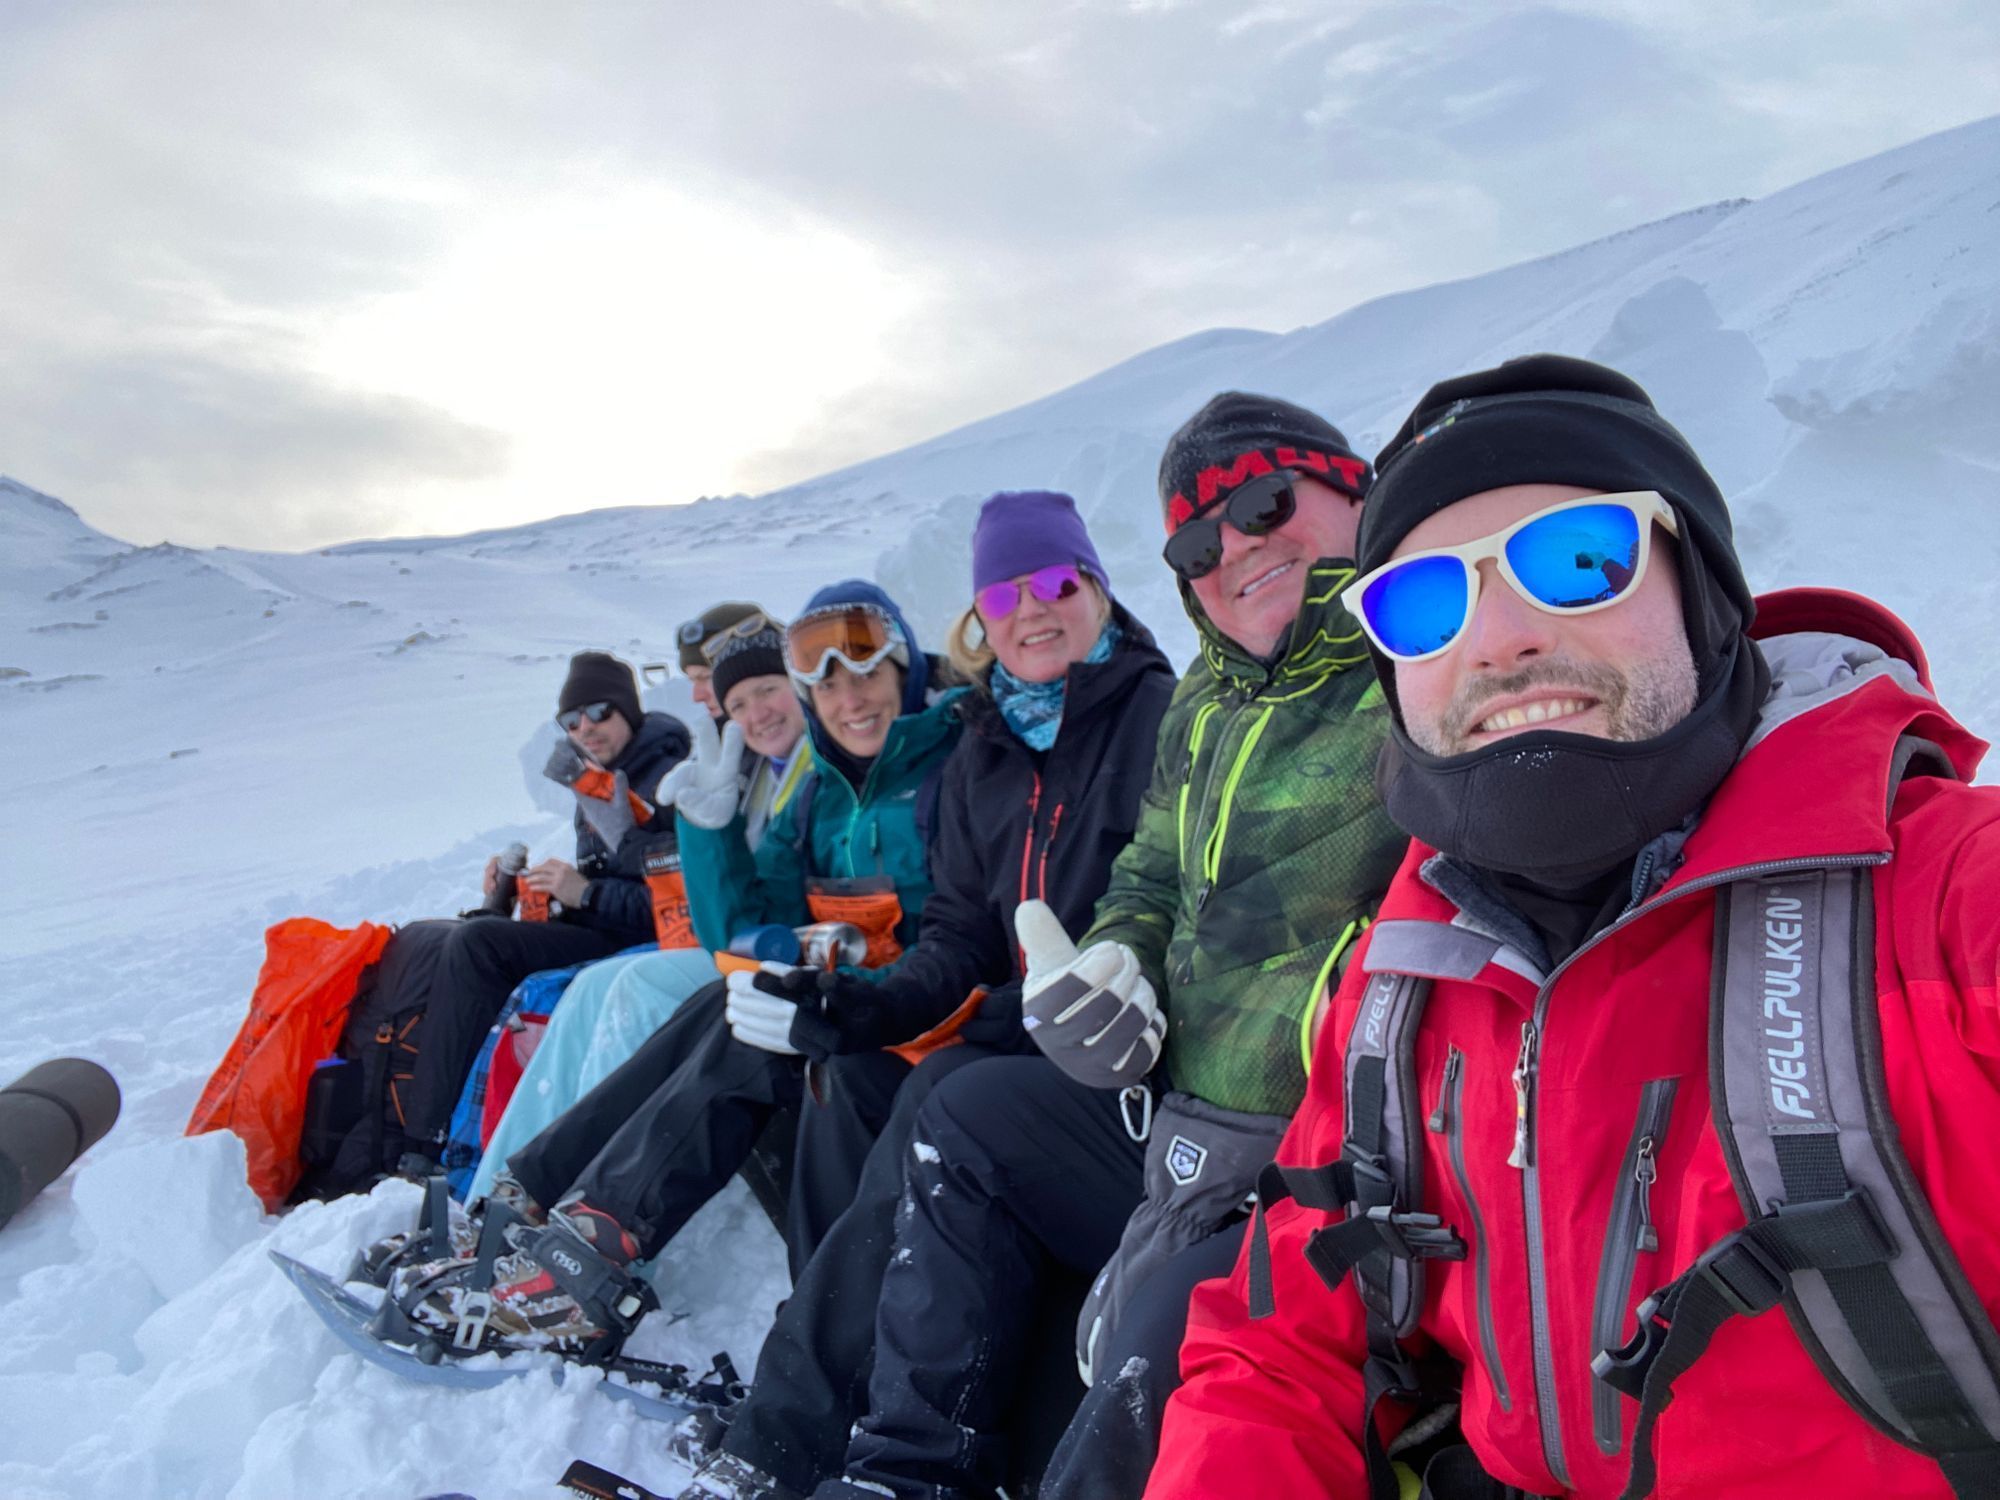 A group of Much Better Adventurers in Svalbard. Photo: Tom Hall